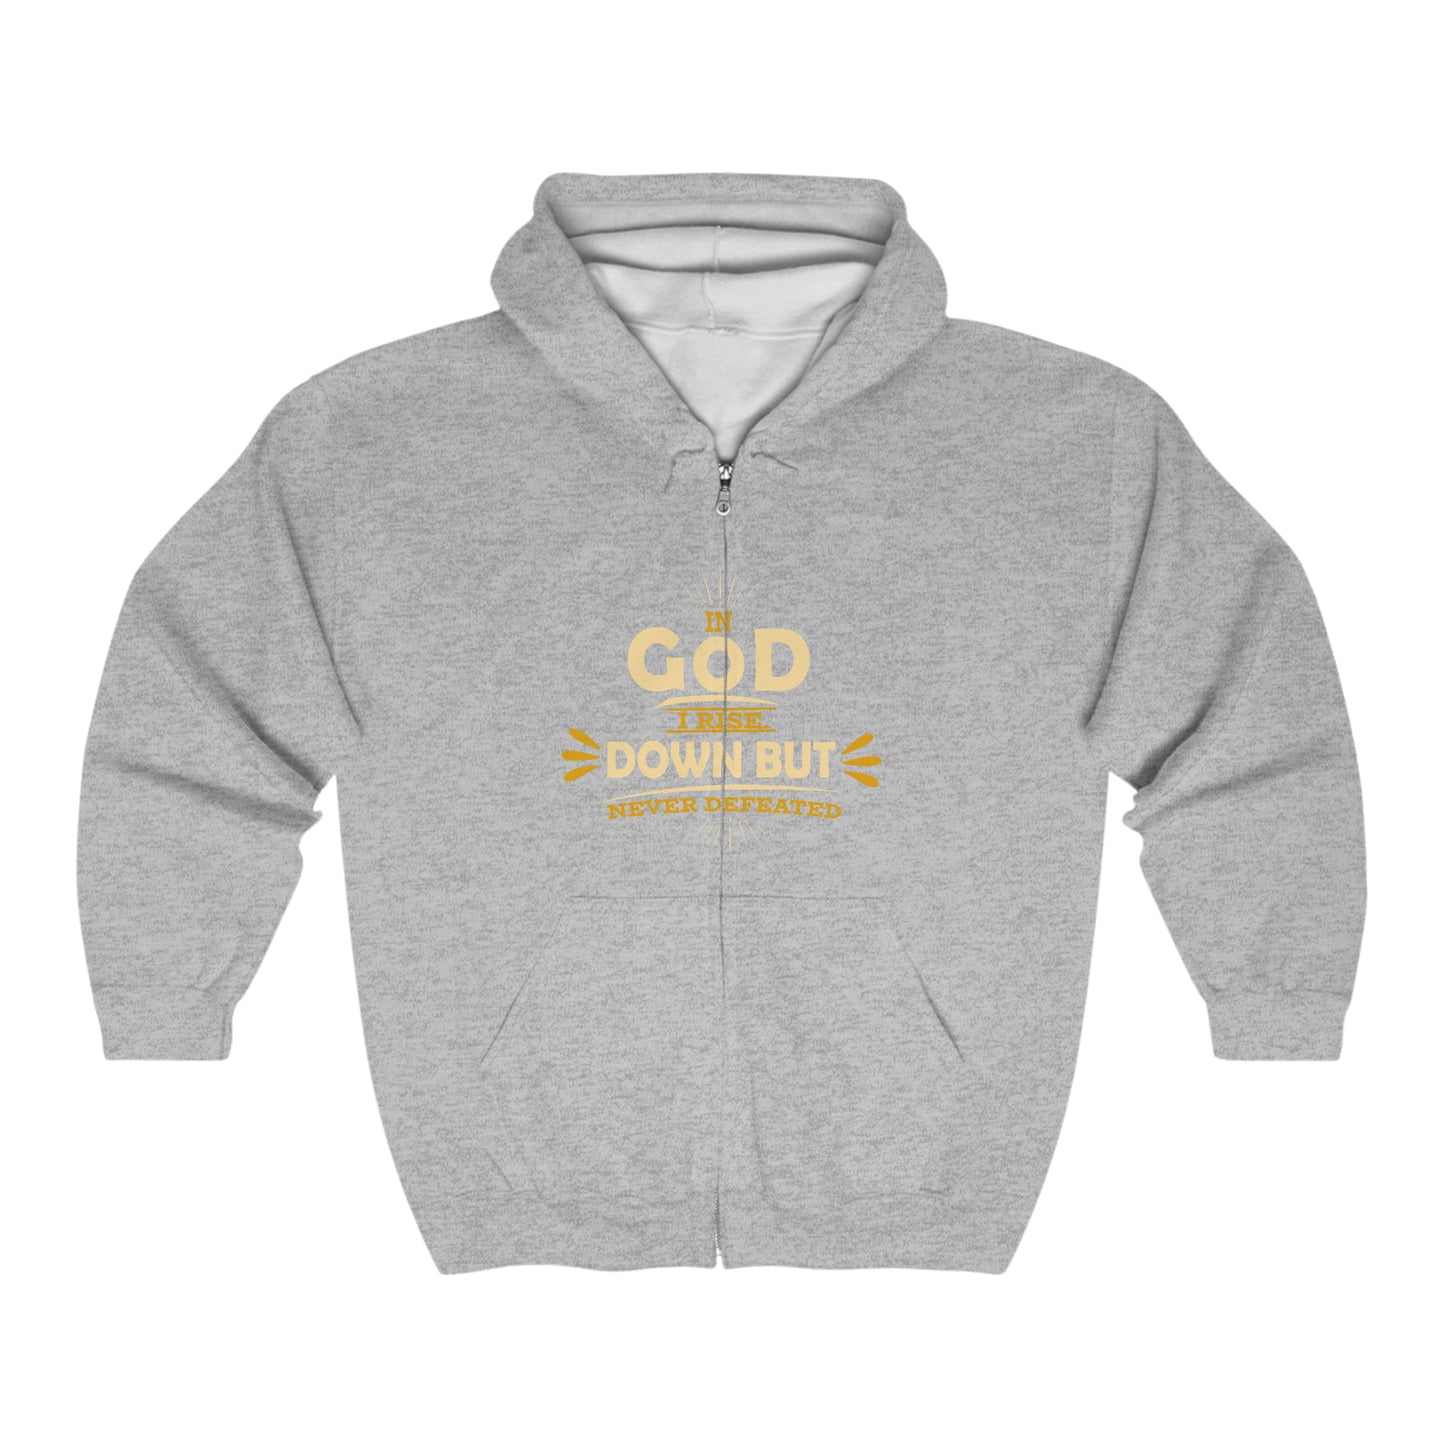 In God I Rise Down But Never Defeated Unisex Heavy Blend Full Zip Hooded Sweatshirt